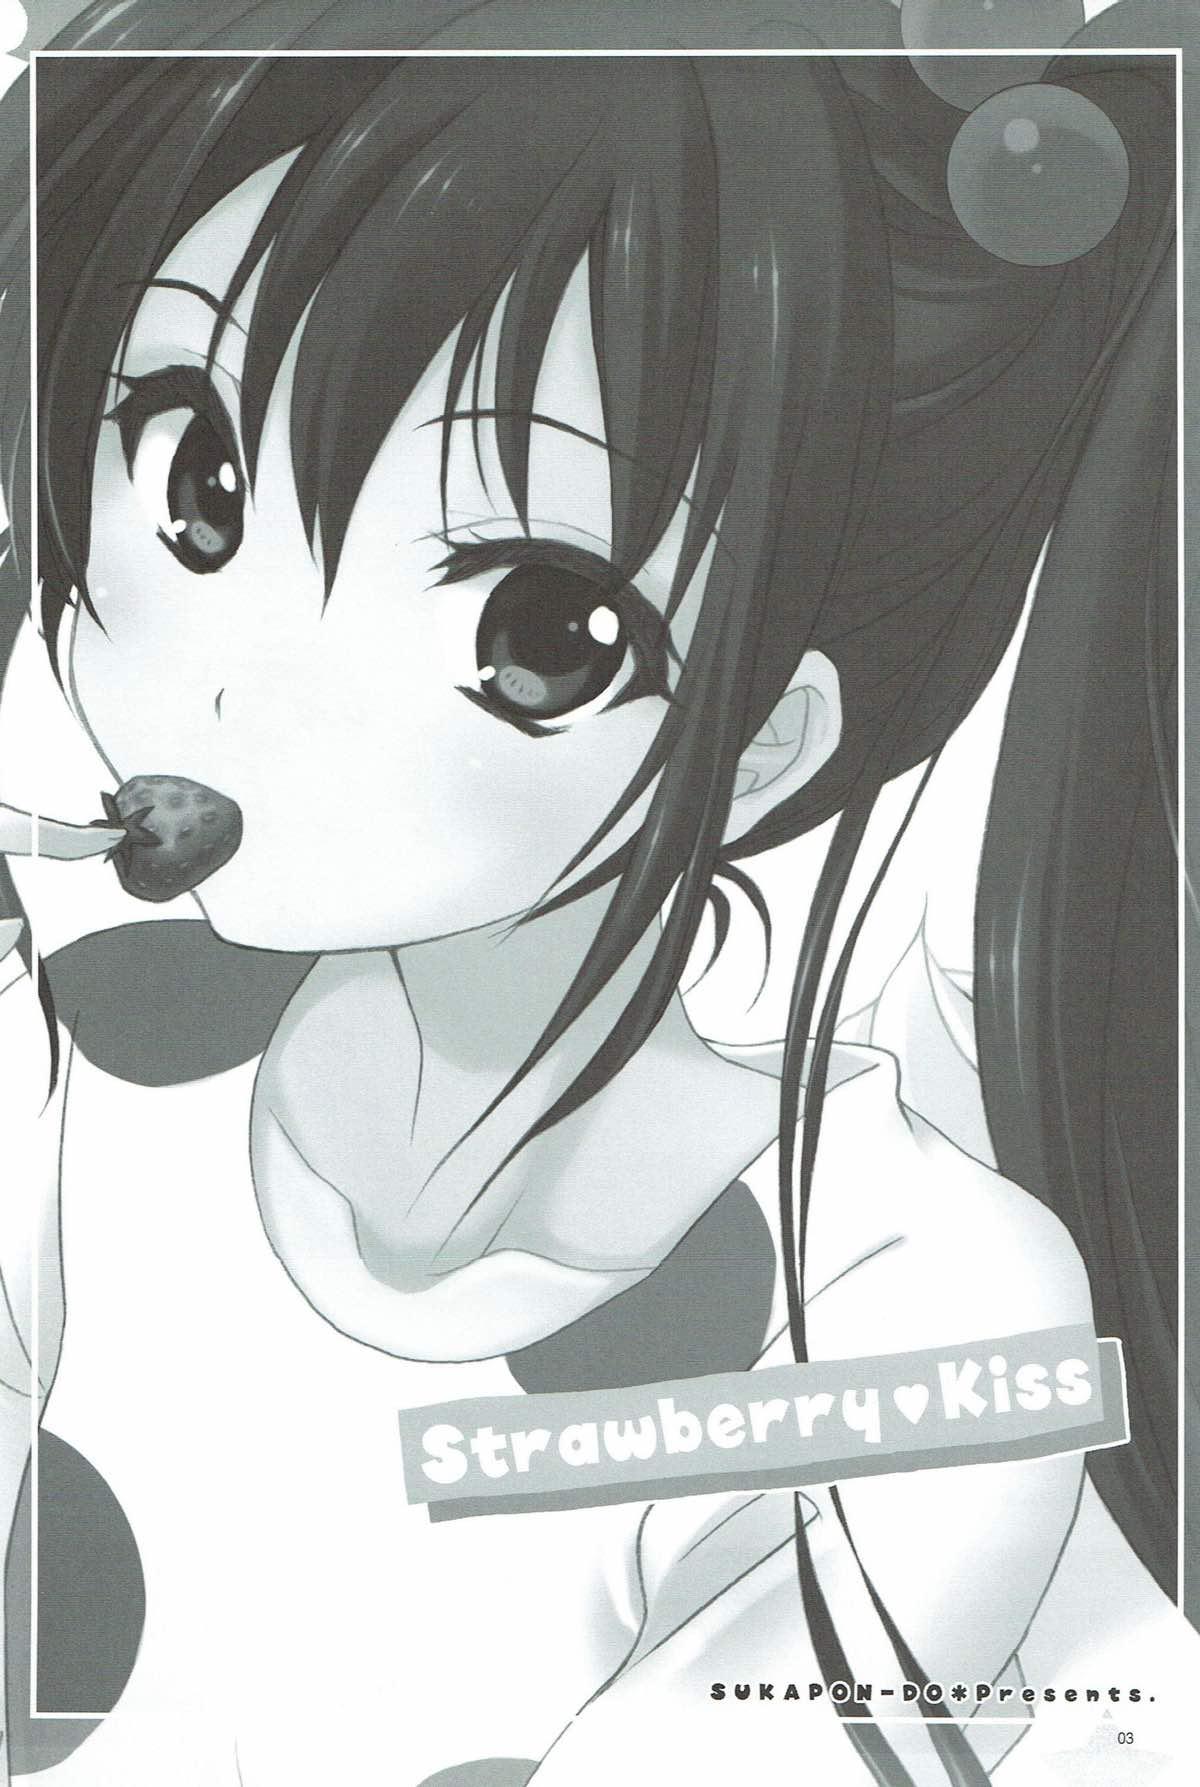 Tugging Strawberry Kiss - K on Web - Page 2